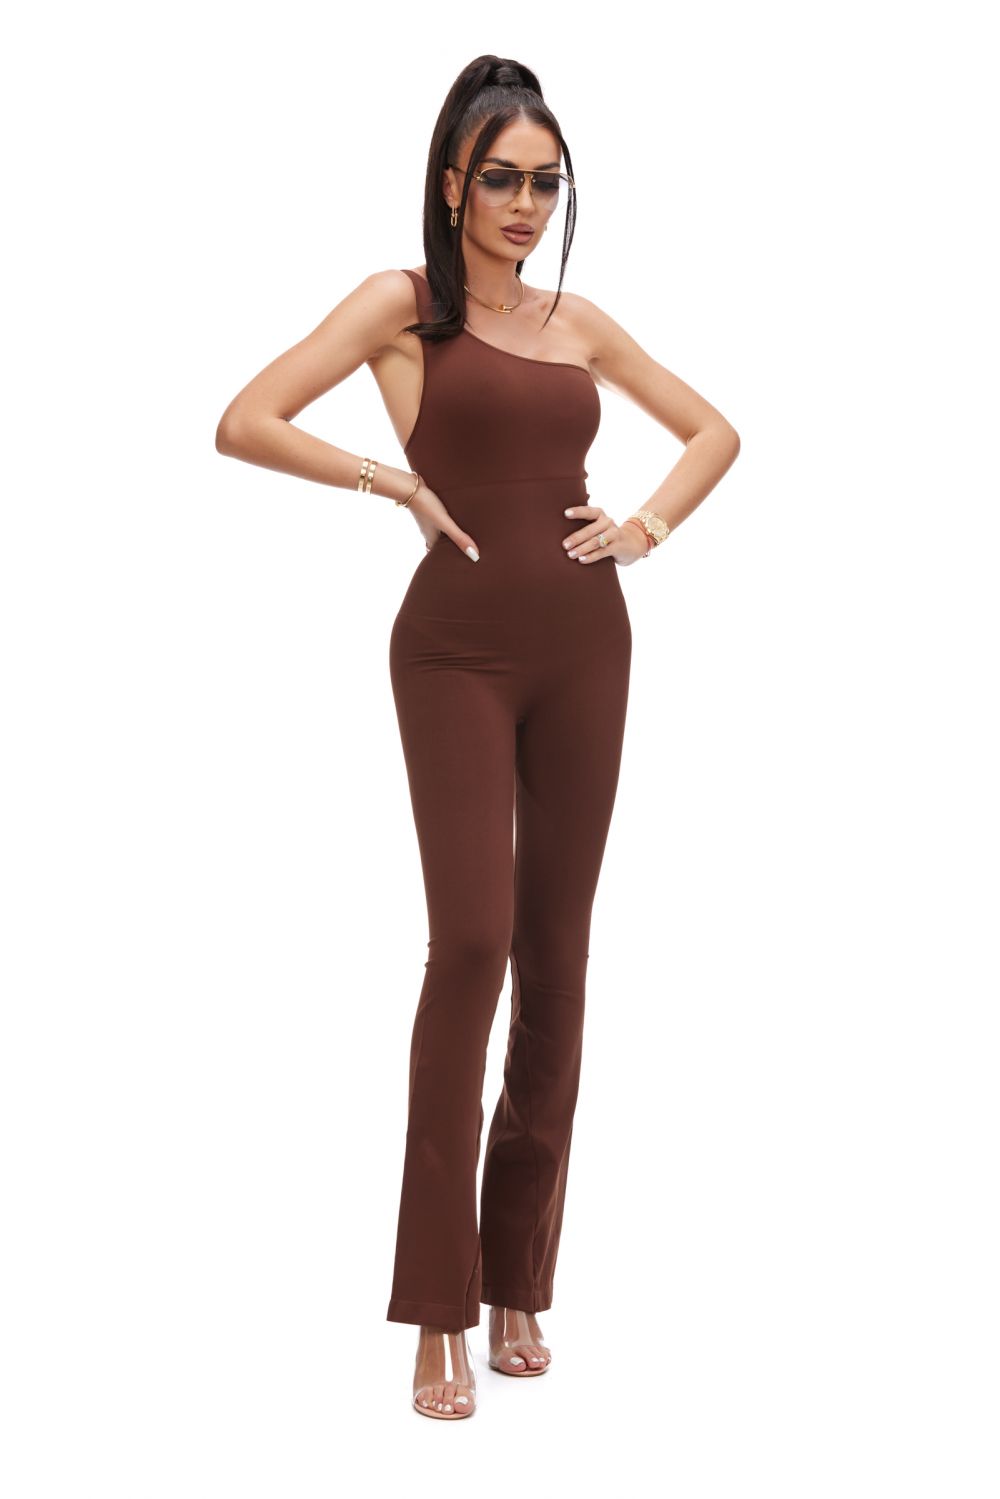 Ladies' casual brown modeling overalls Mimoza Bogas